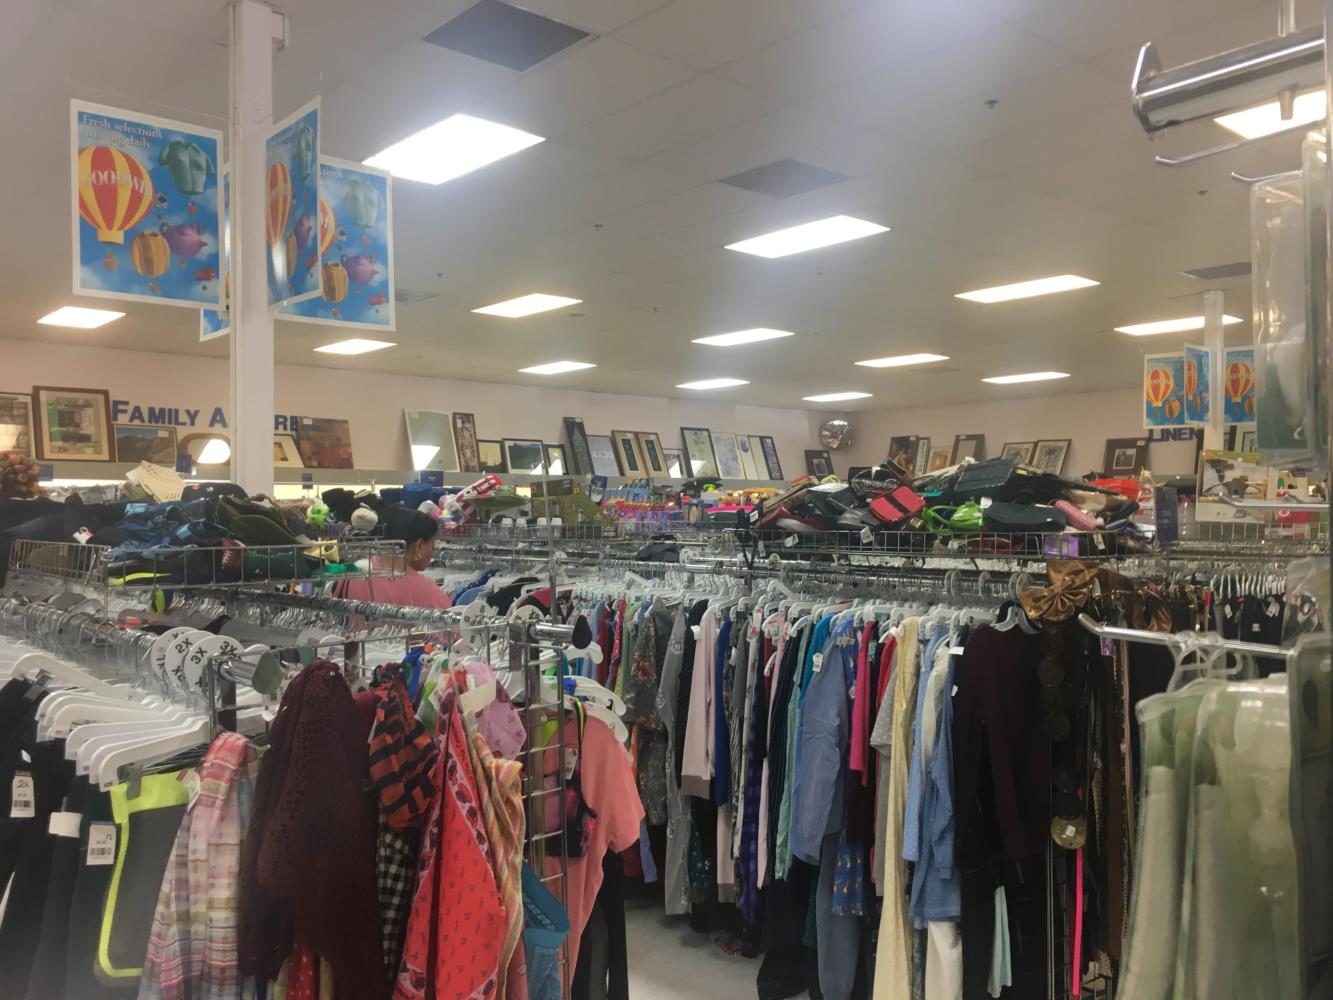 Thrift+shopping+is+good+for+community%2C+environment%2C+the+soul.